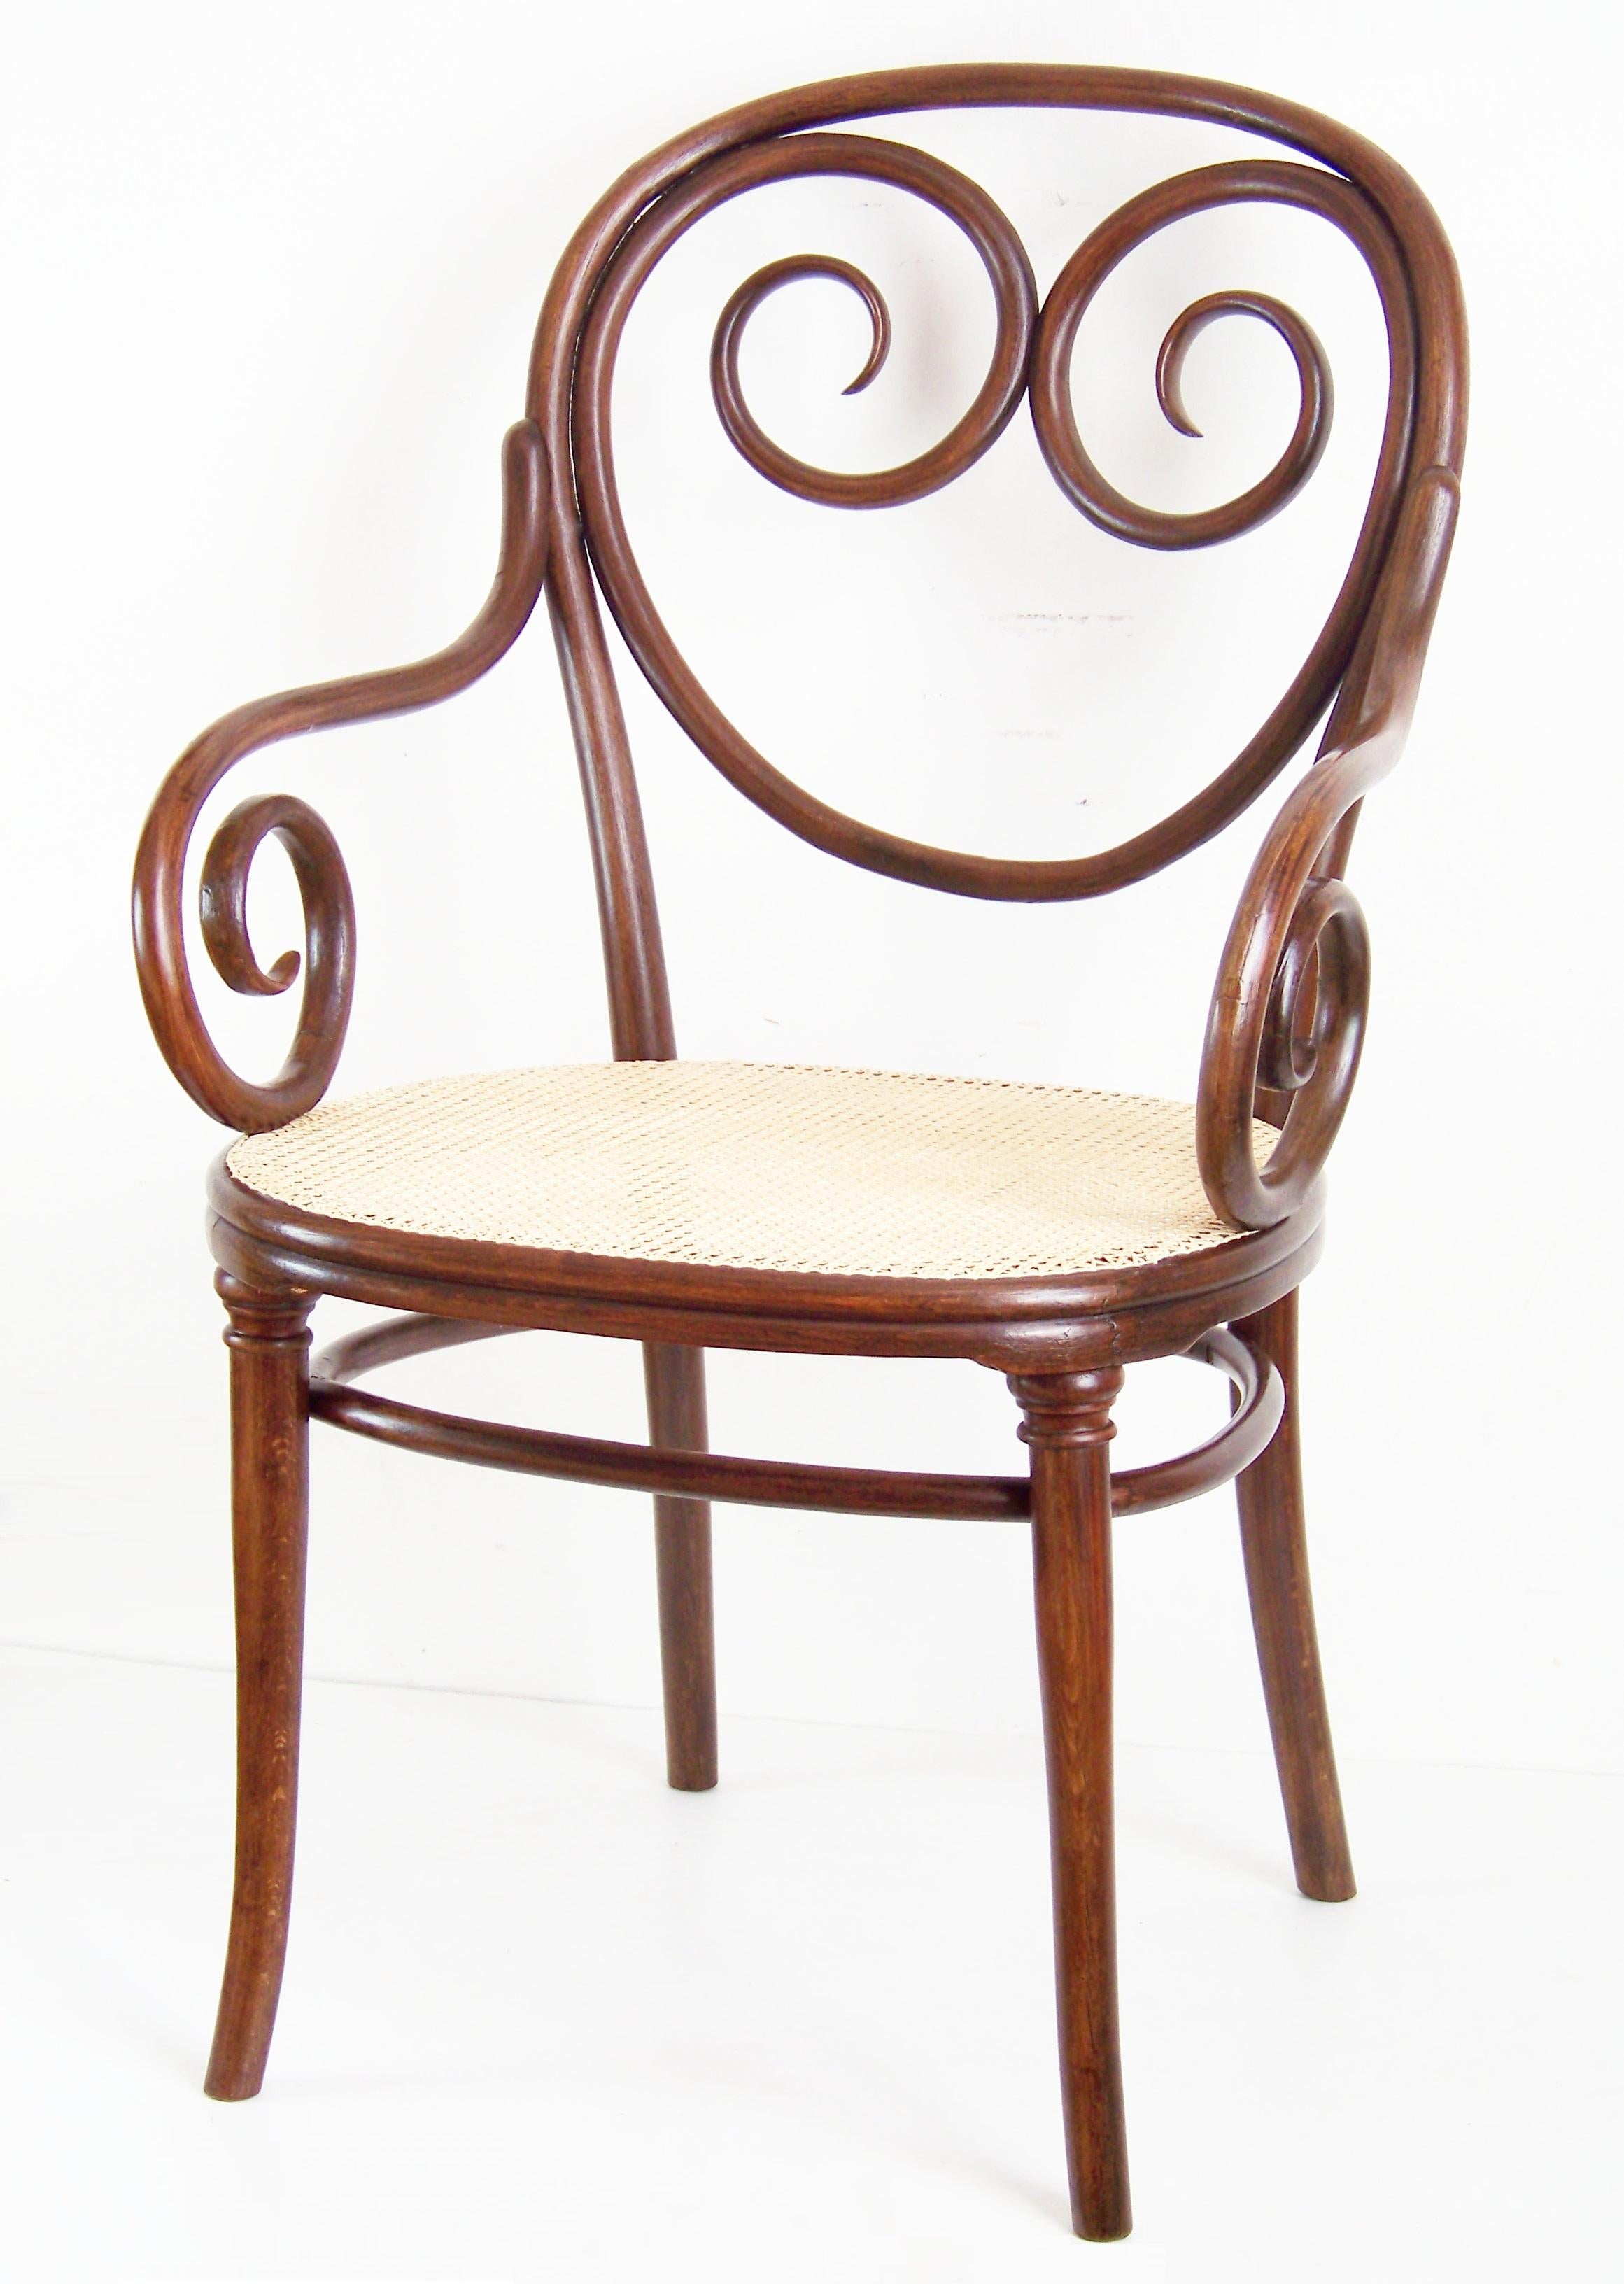 Manufactured in Austria by the Gebrüder Thonet Company. Marked with paper label and stamp 